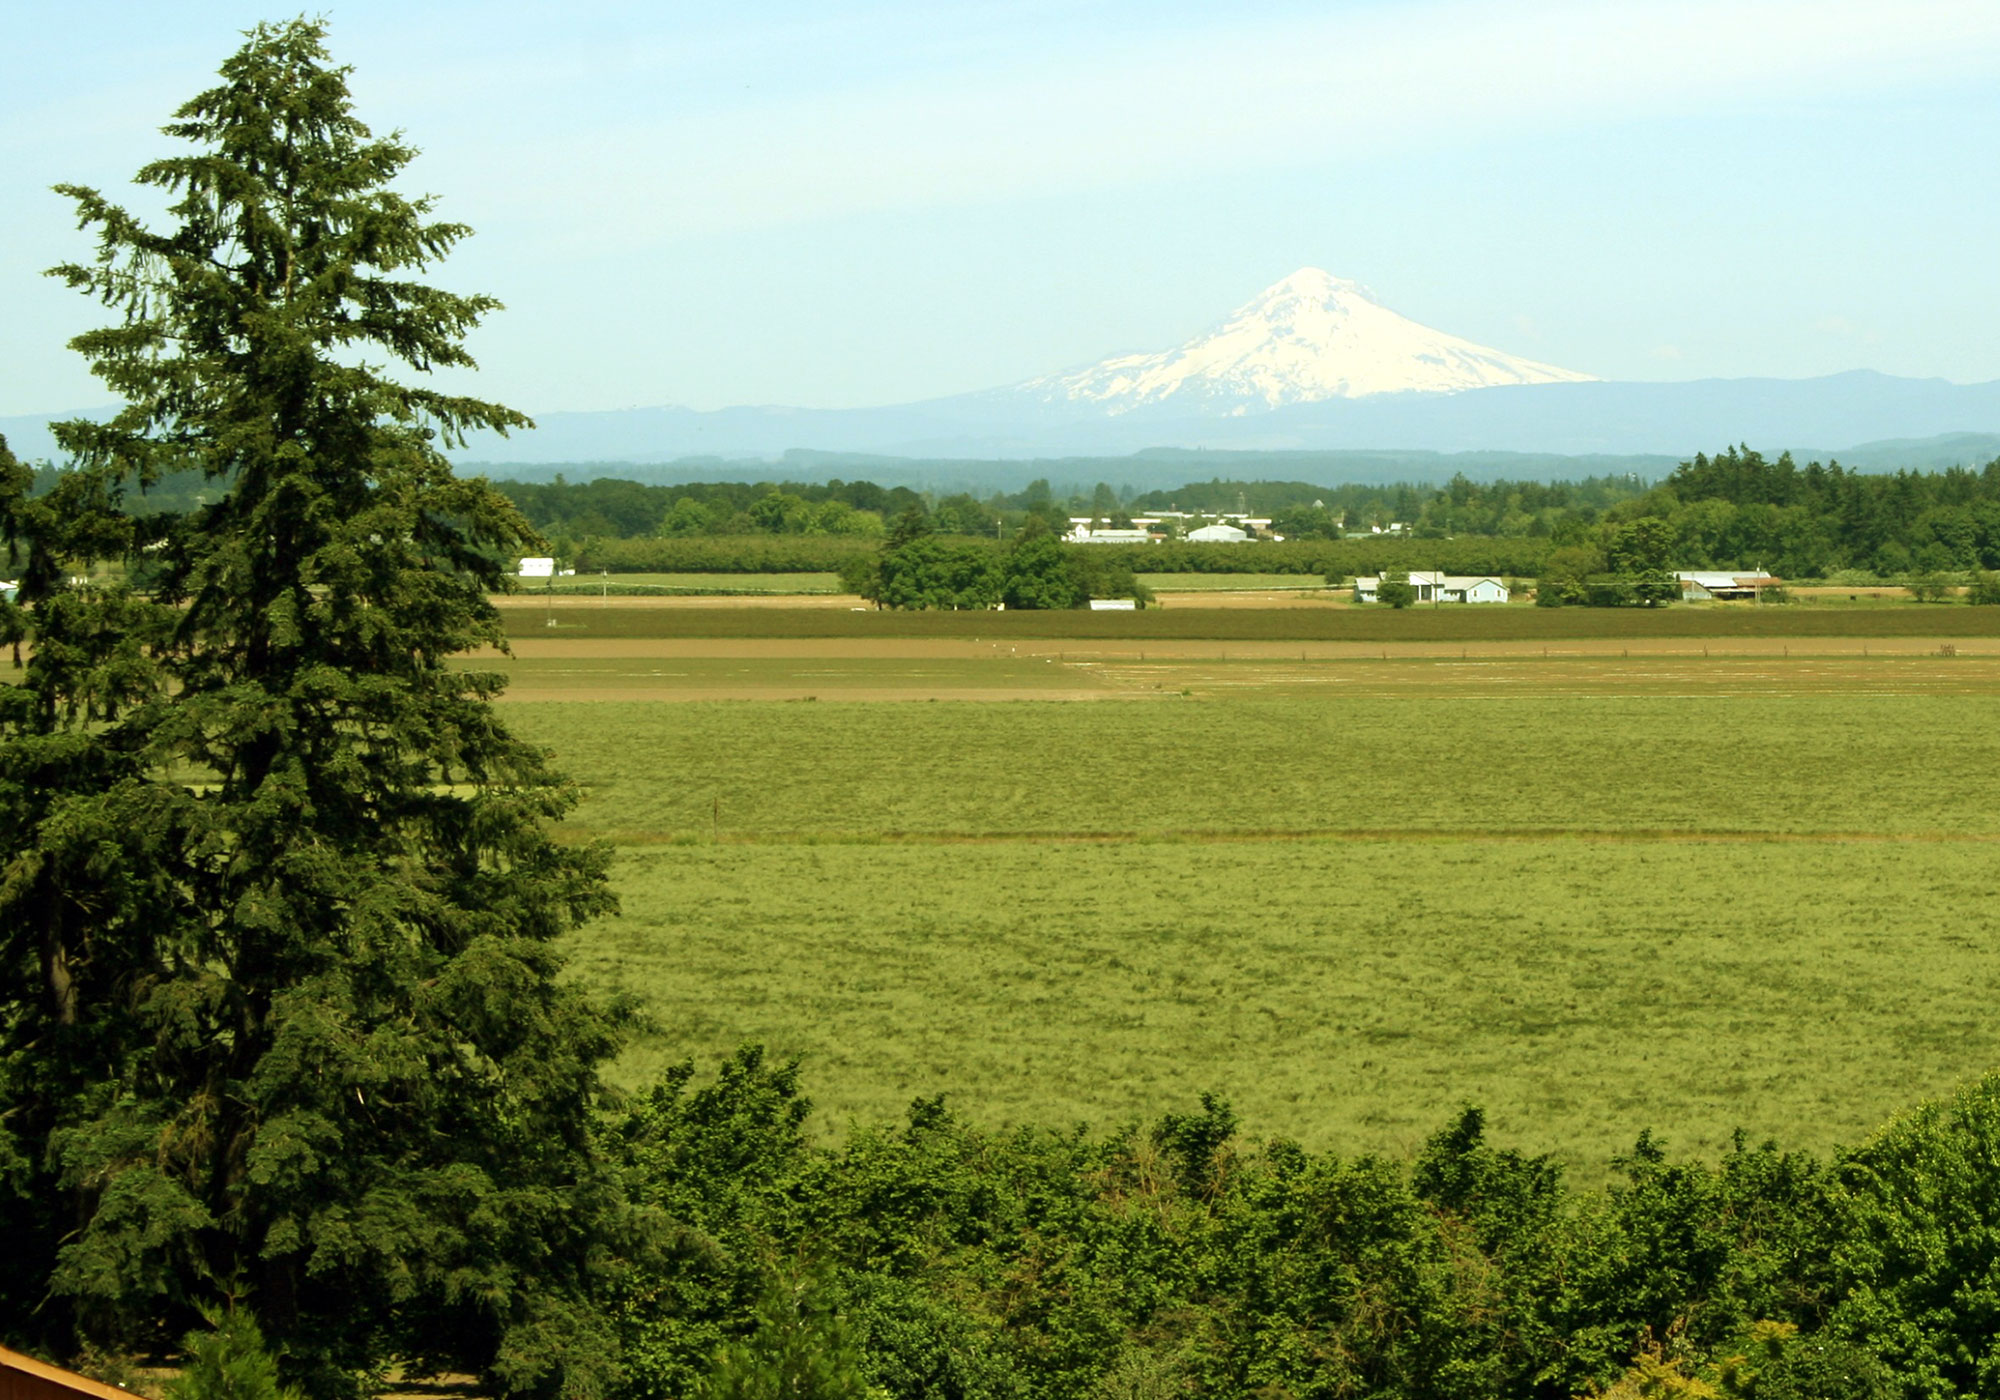 A view of French Prairie with Mount Hood in the background (Photo Credit: Ben Williams)